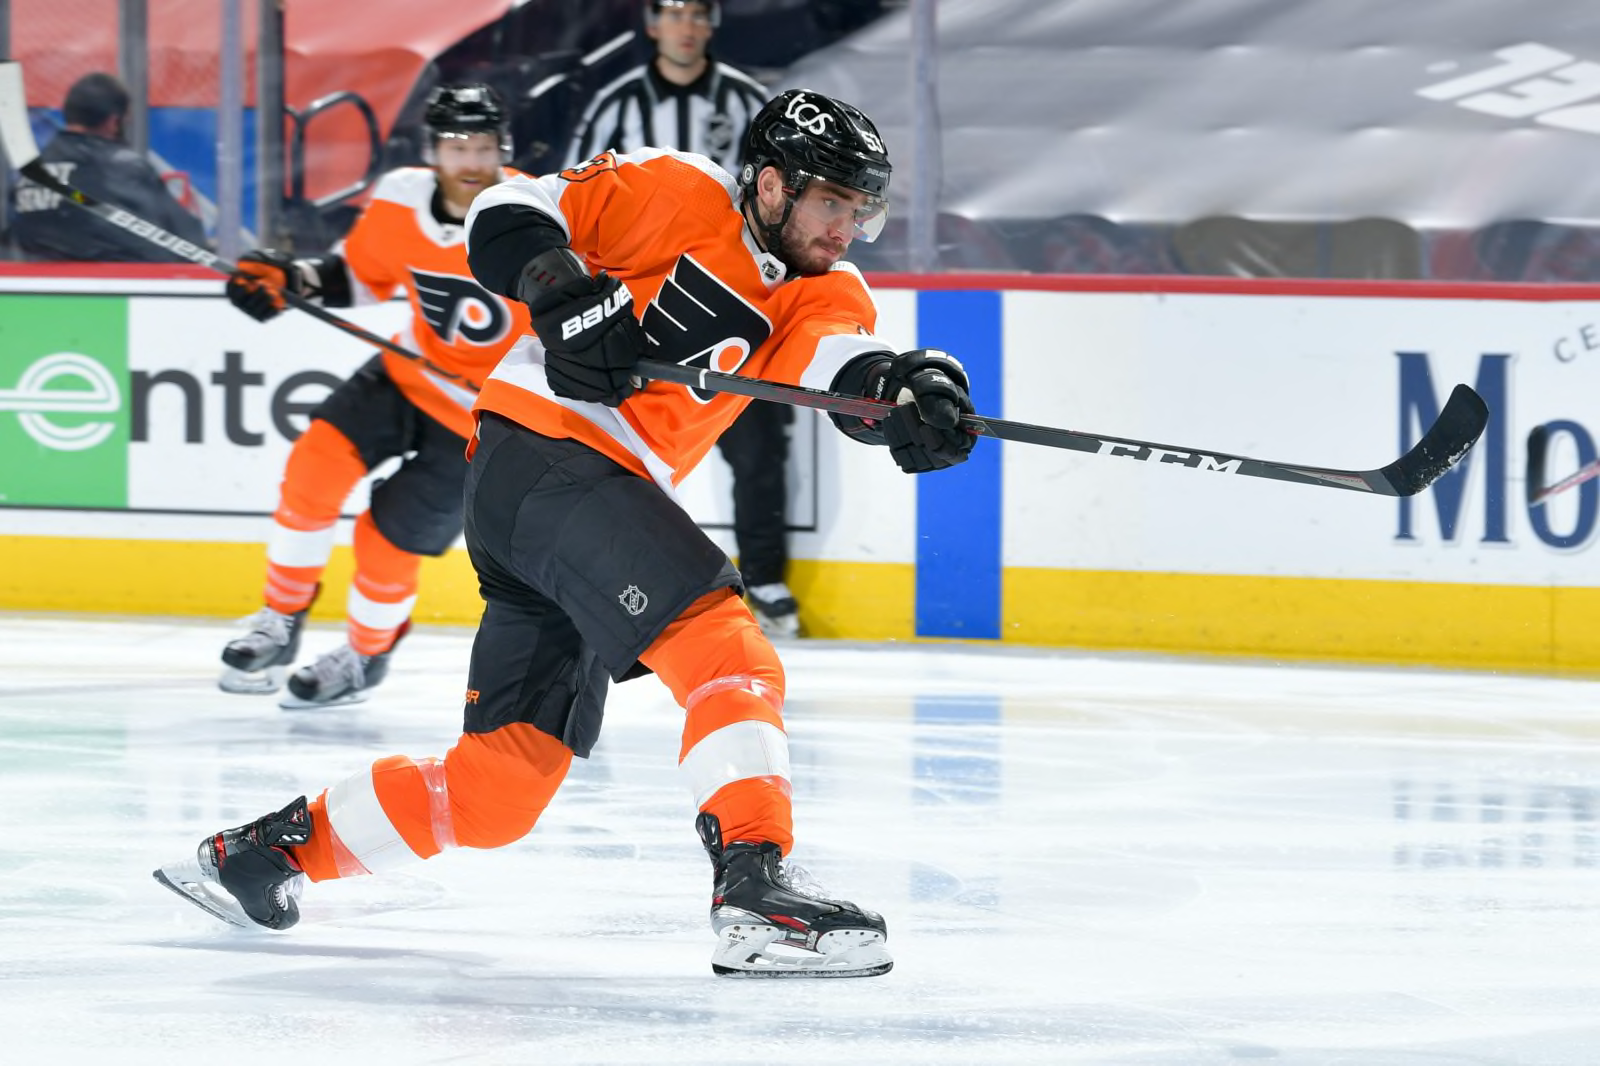 Flyers' Shelley hit with 10-game suspension